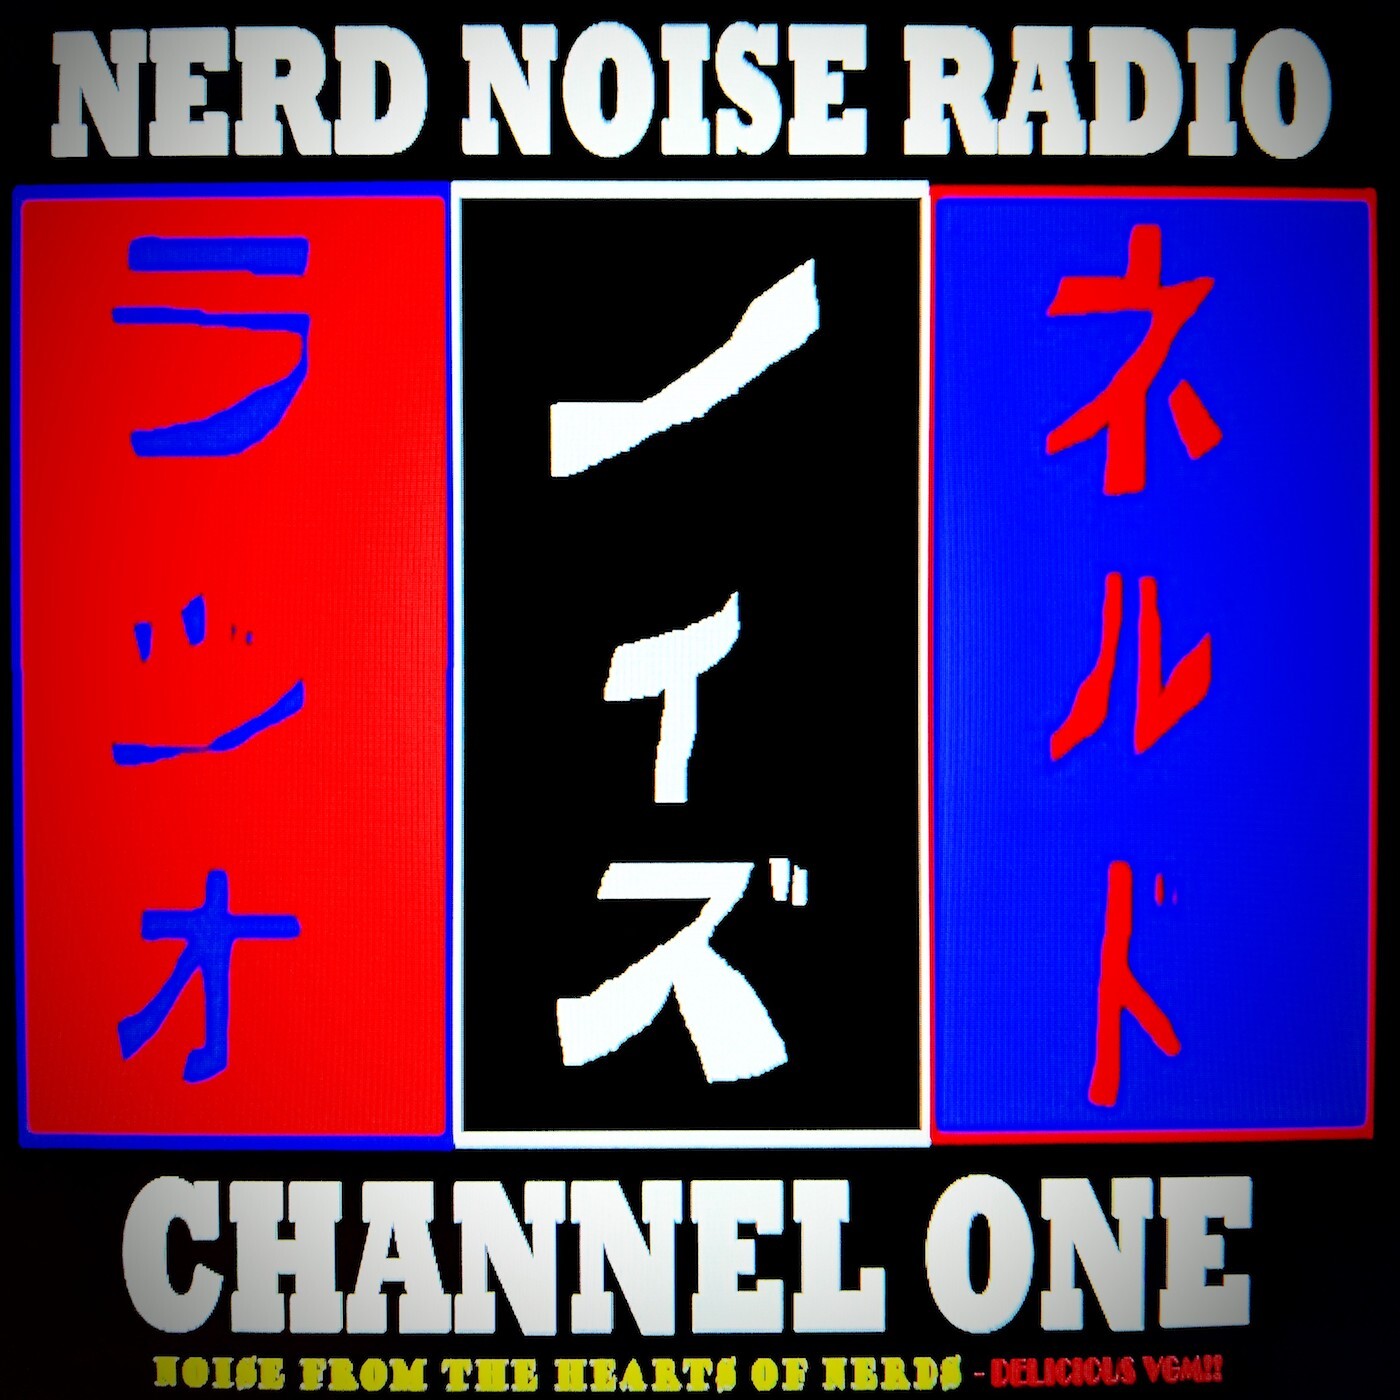 Nerd Noise Radio - Channel 1: ”Noise from the Hearts of Nerds” Podcast - “C1E38: TwoFer Tuesday - vol. 4”